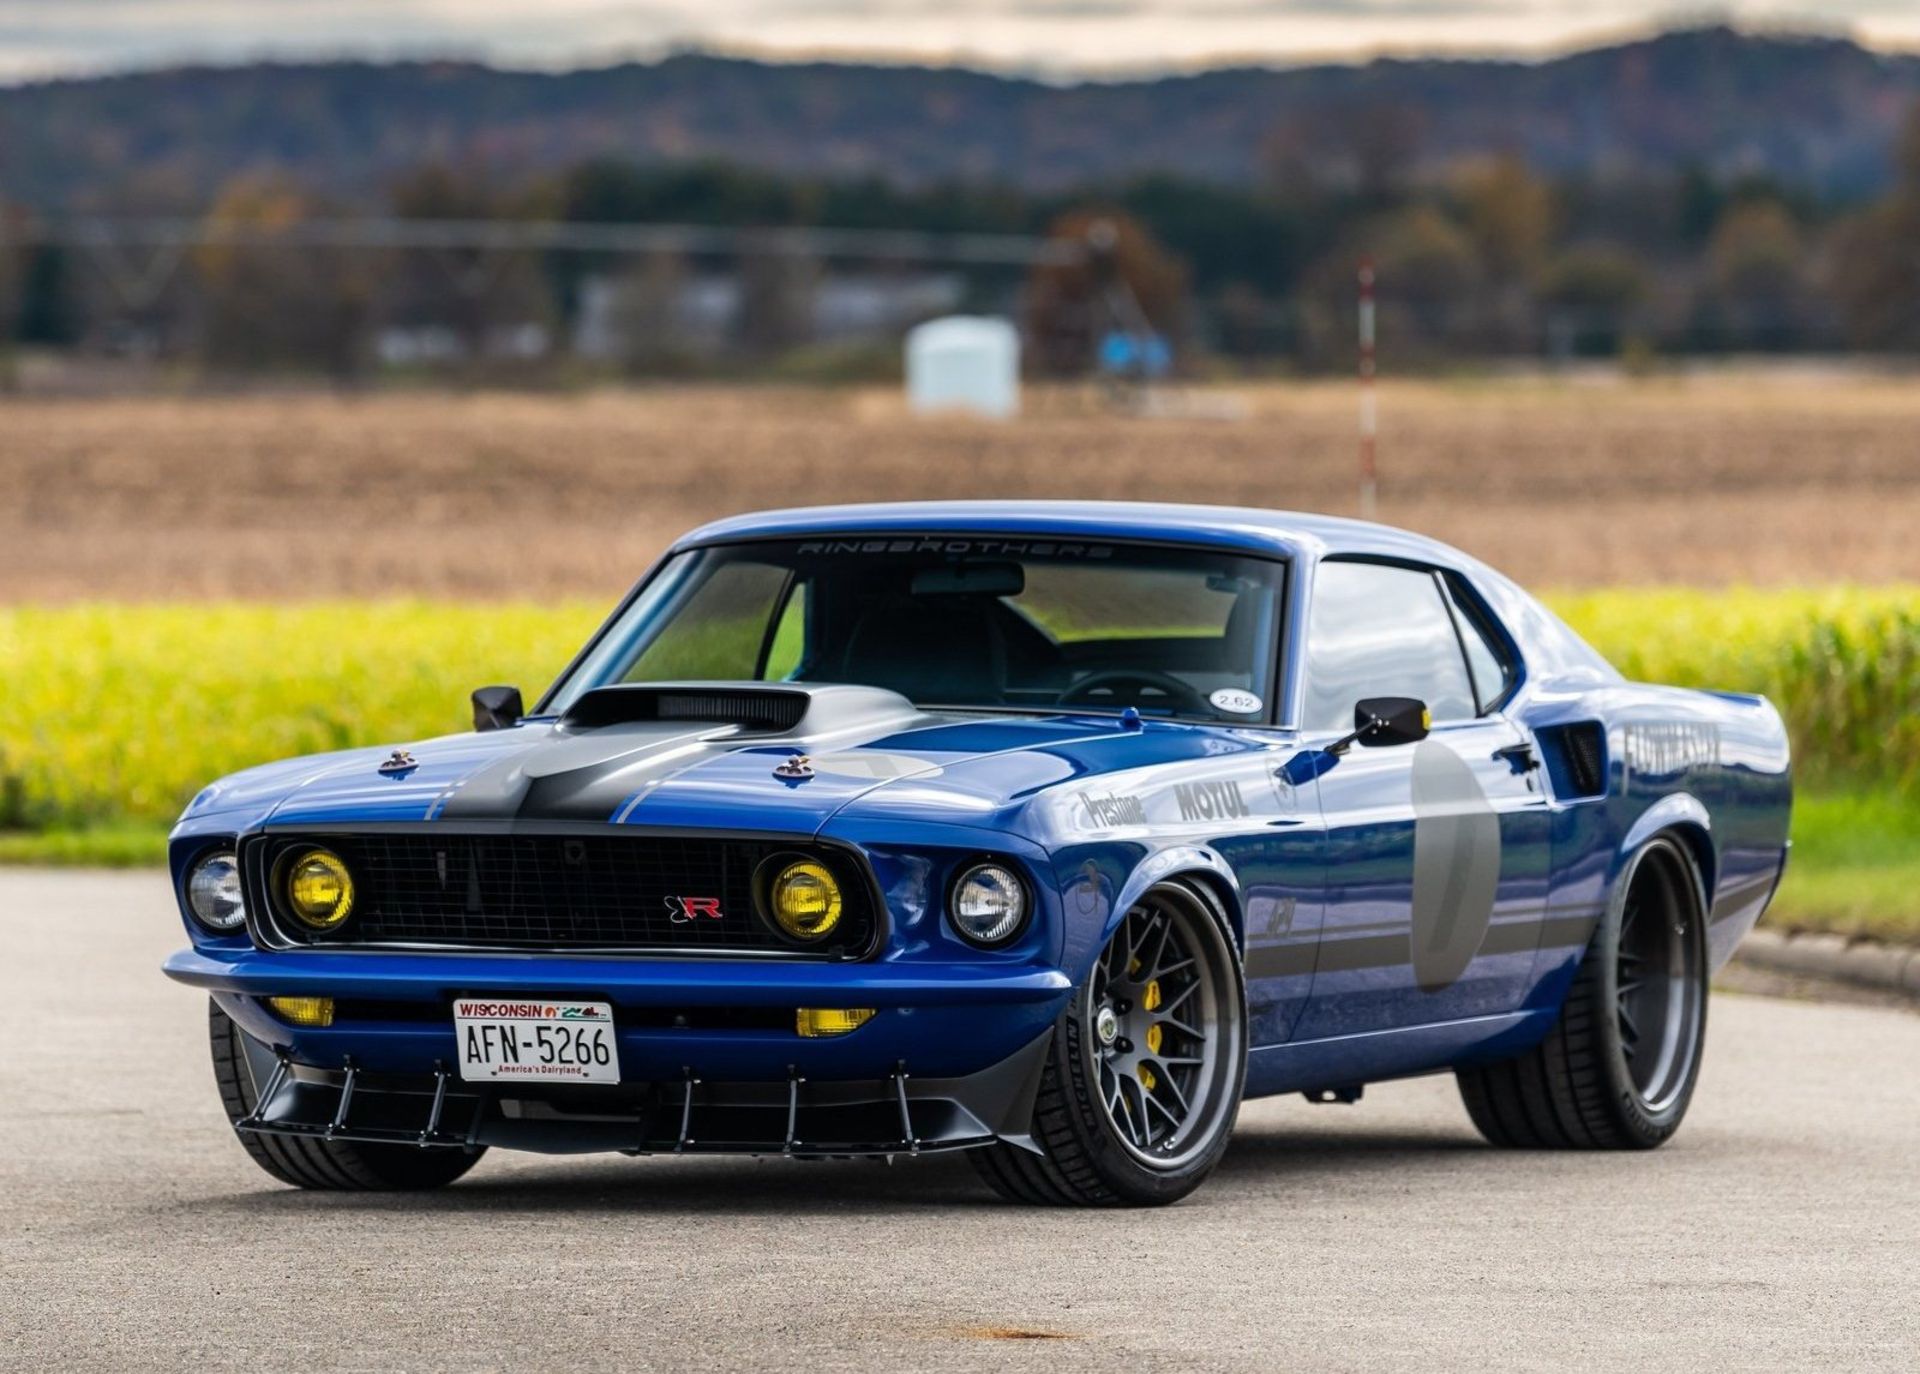  Ring brothers mustang classic 1969